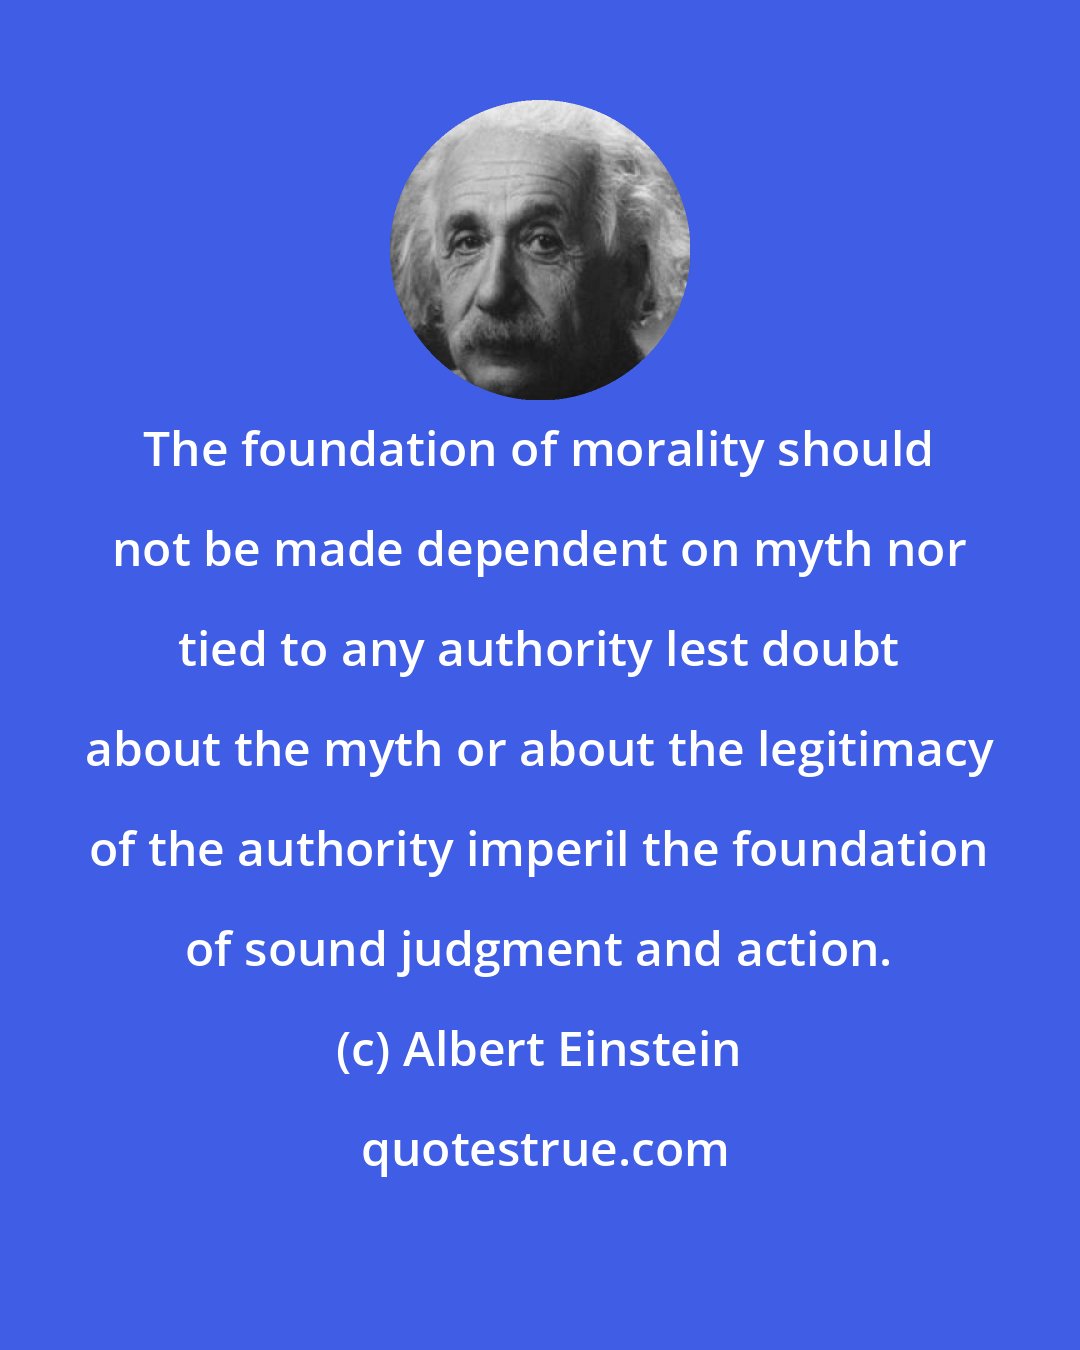 Albert Einstein: The foundation of morality should not be made dependent on myth nor tied to any authority lest doubt about the myth or about the legitimacy of the authority imperil the foundation of sound judgment and action.